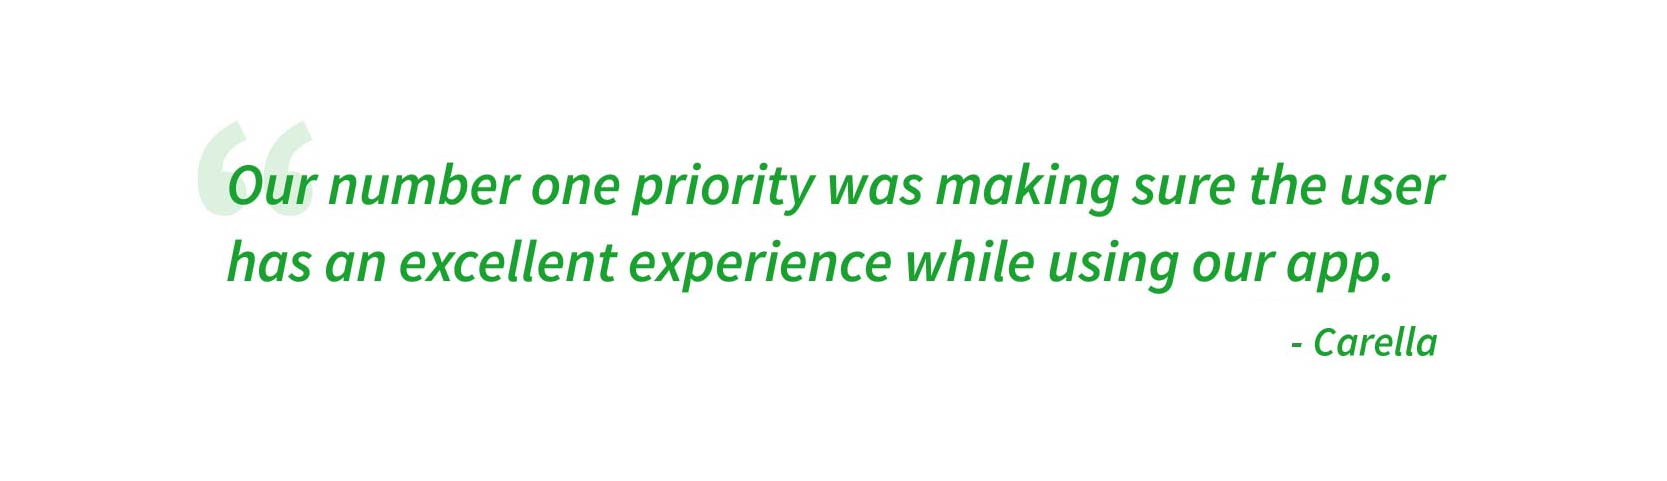 Our number one priority was making sure the user has an excellent experience while using our app.